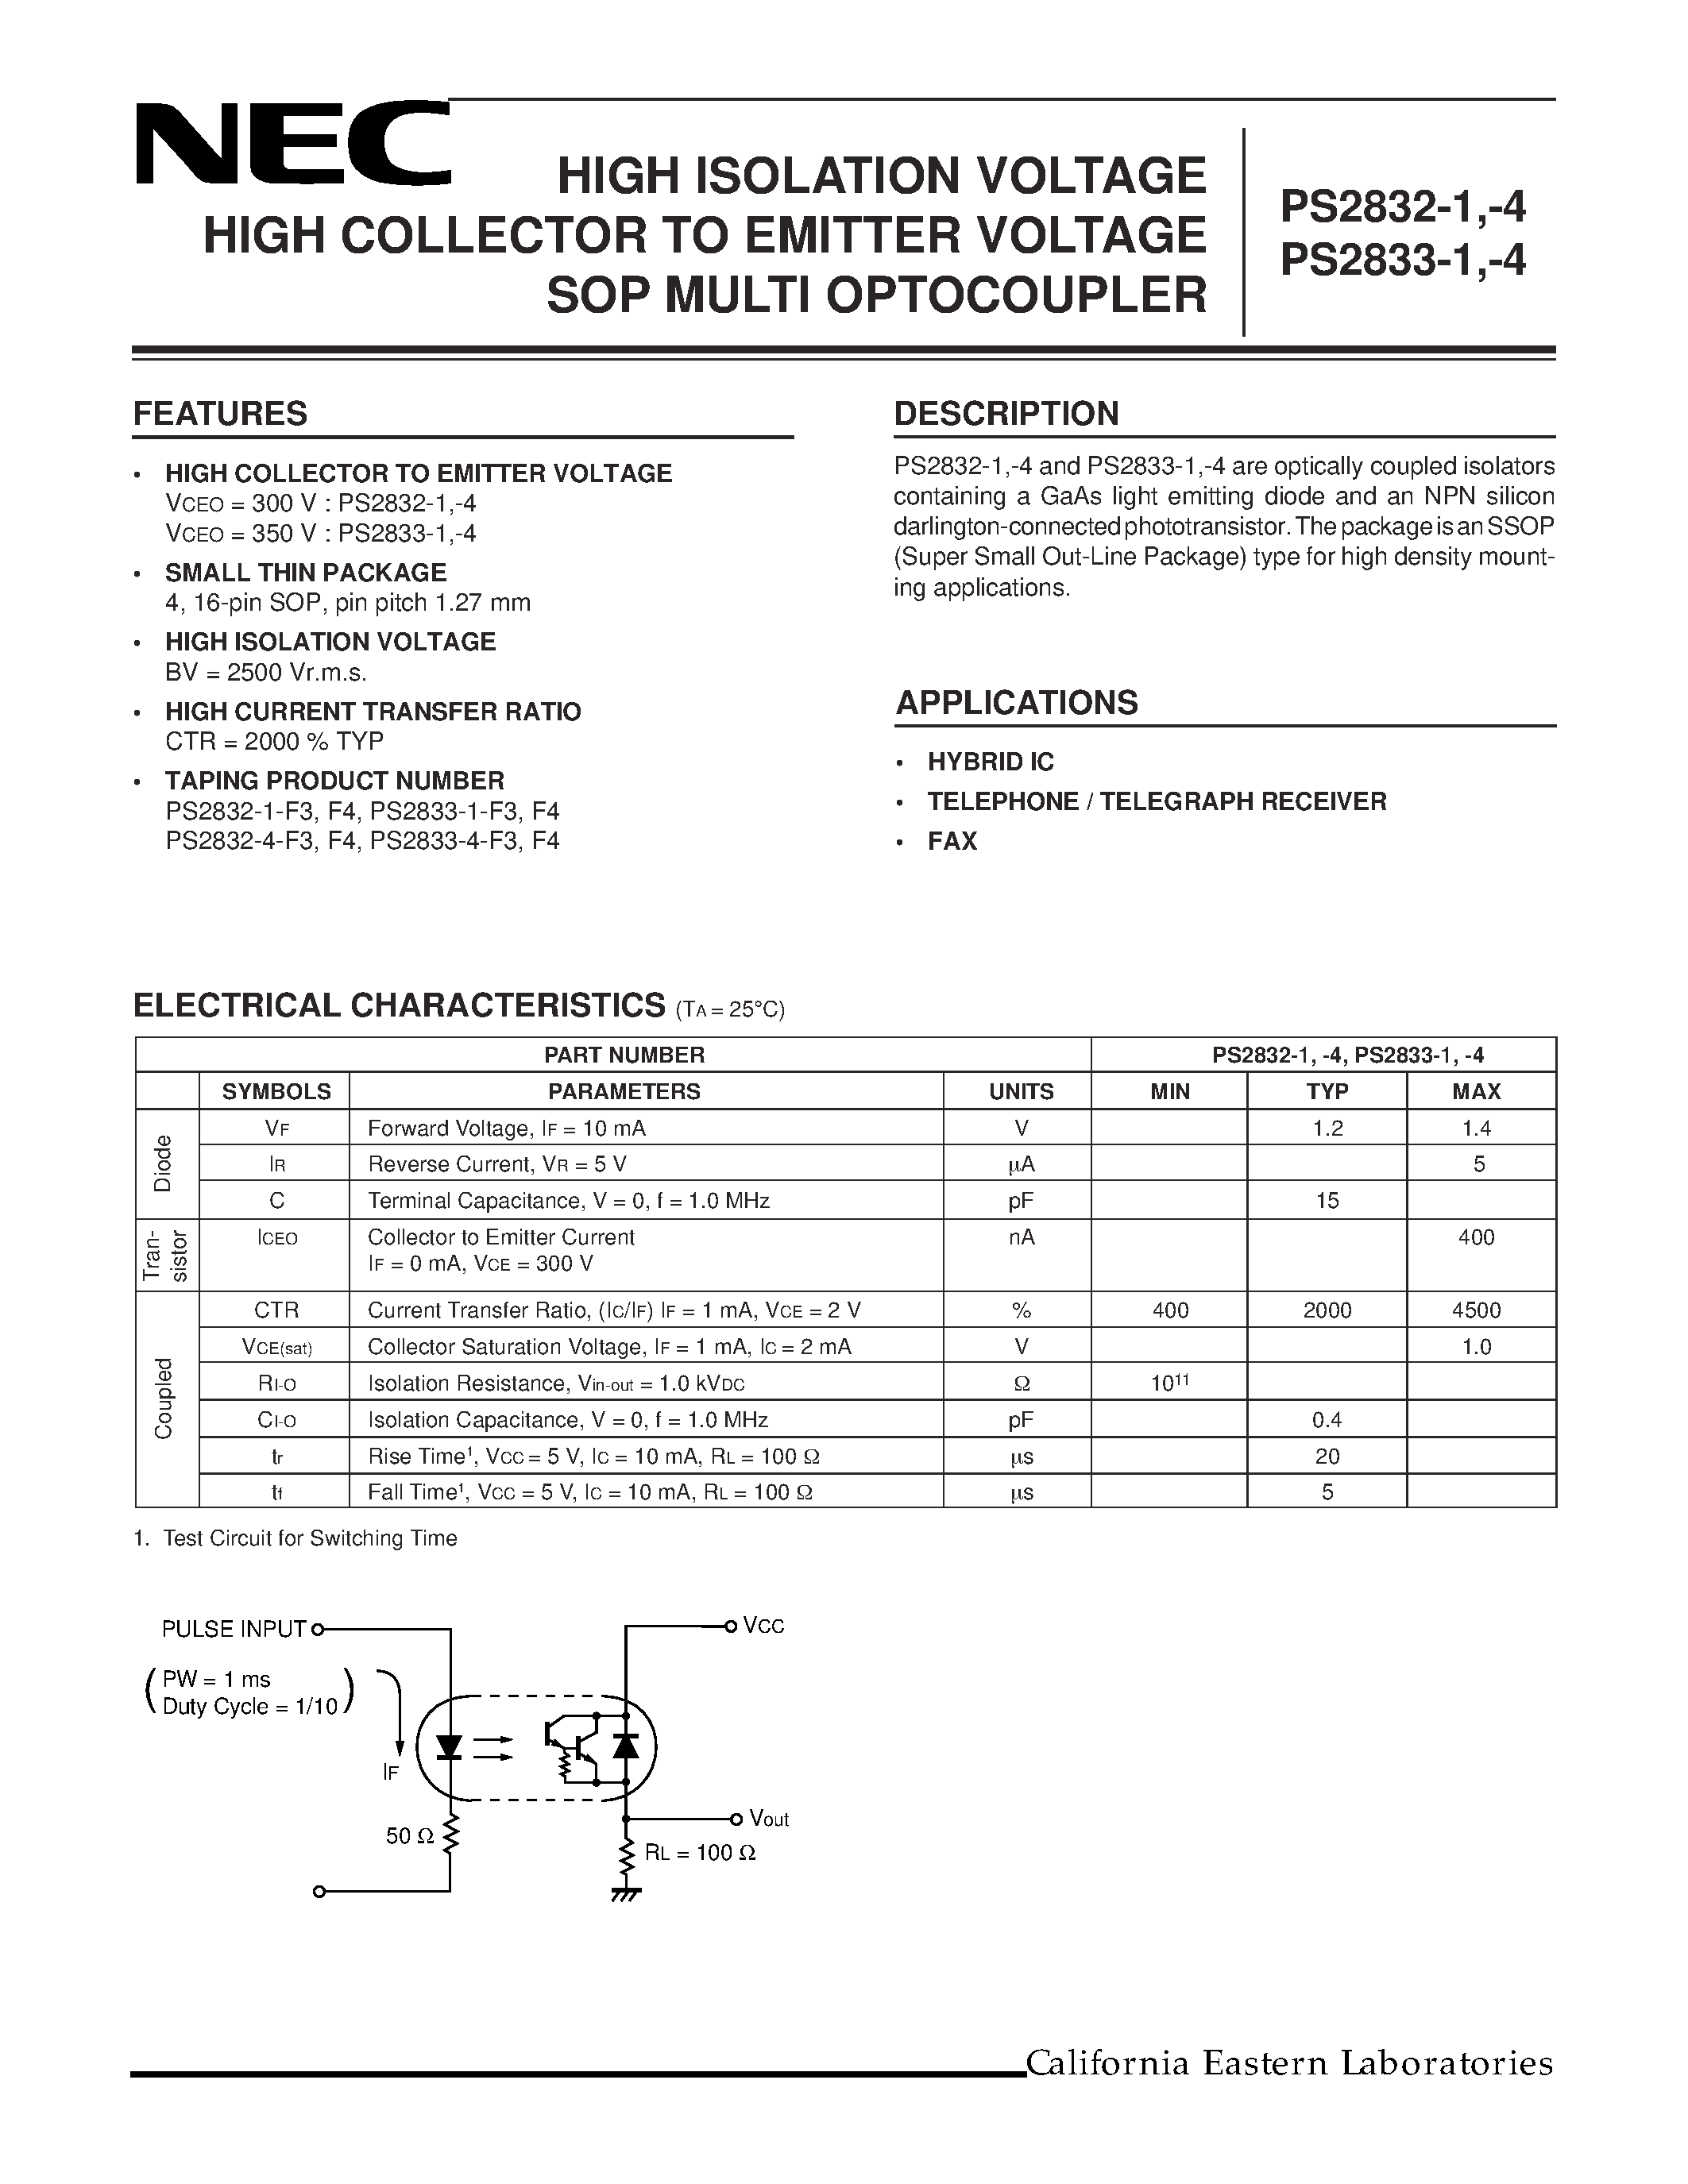 Даташит PS2832-1-V-F4 - HIGH ISOLATION VOLTAGE HIGH COLLECTOR TO EMITTER VOLTAGE SOP MULTI OPTOCOUPLER страница 1